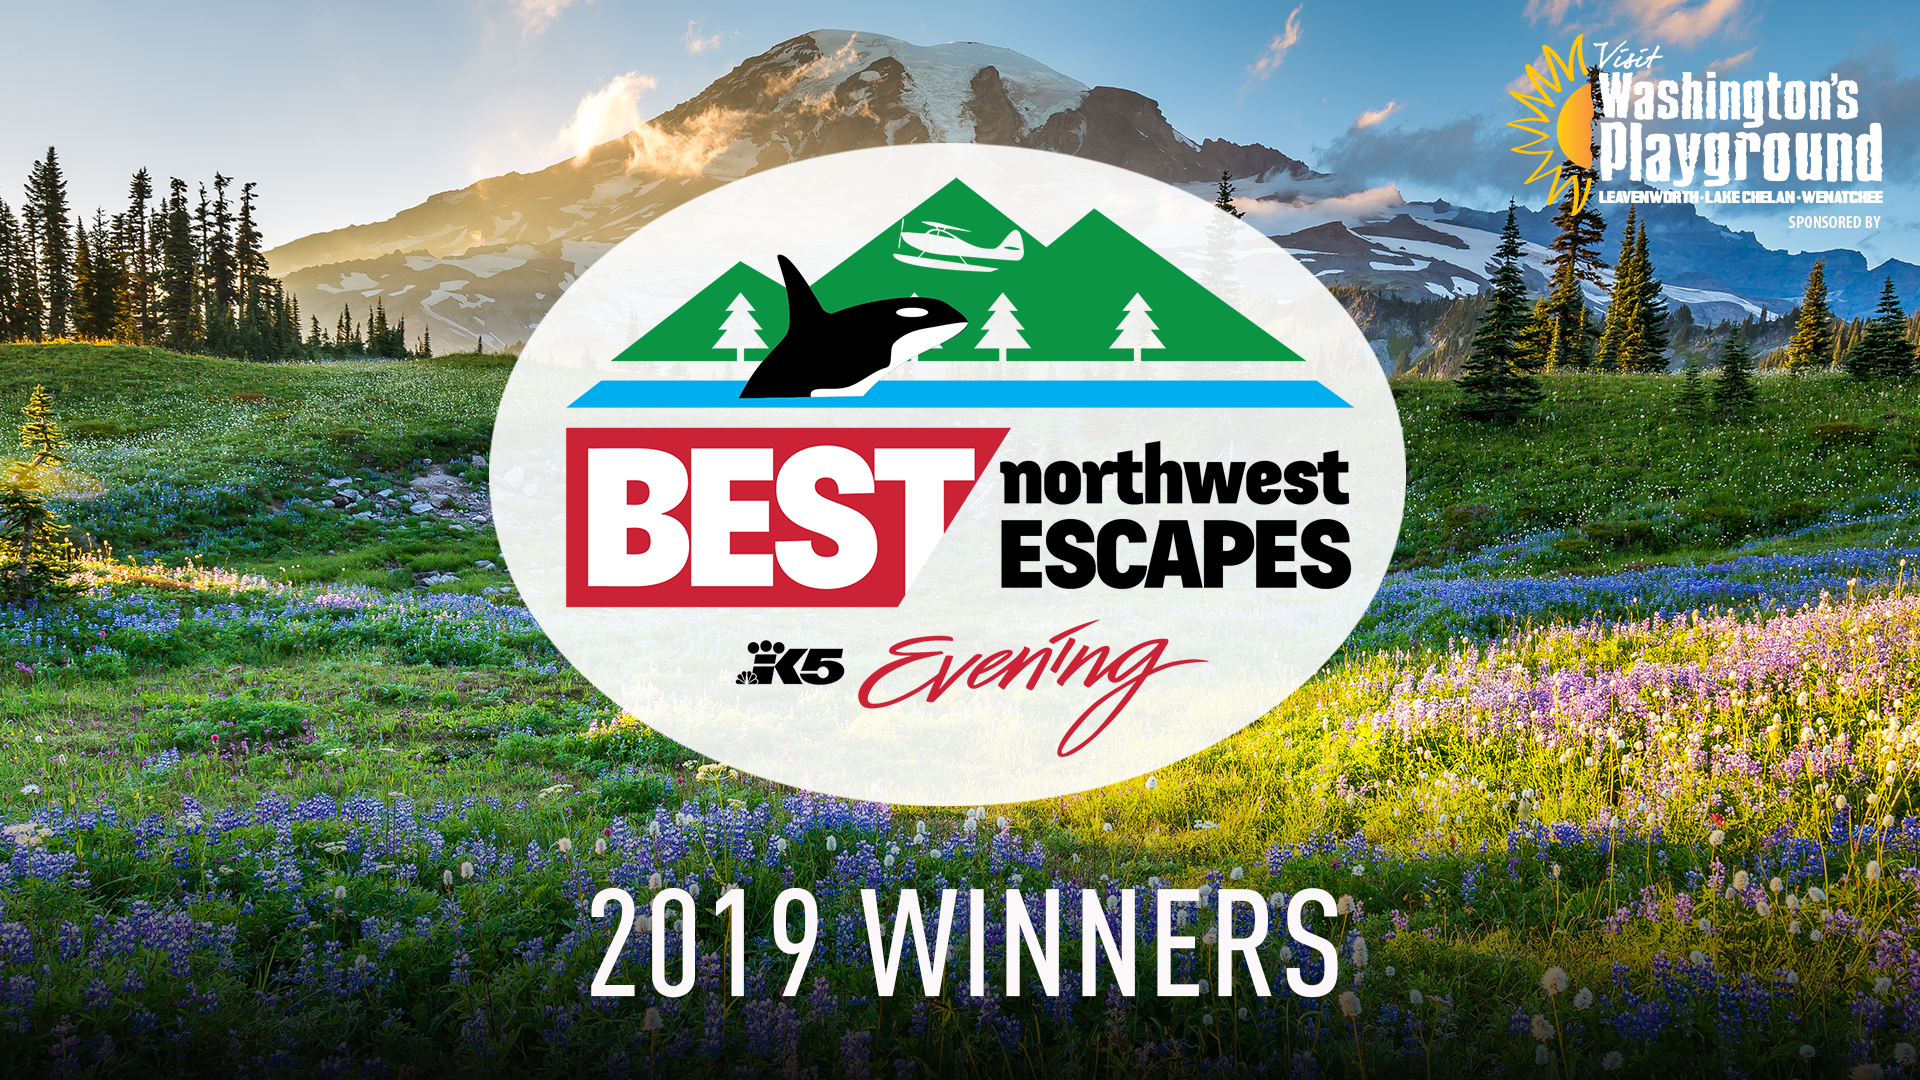 Every year, Evening viewers like YOU nominate and vote for your favorite adventures around the Sound! These are YOUR picks for 2019's BEST Northwest Escapes.  Sponsored by Washington's Playground